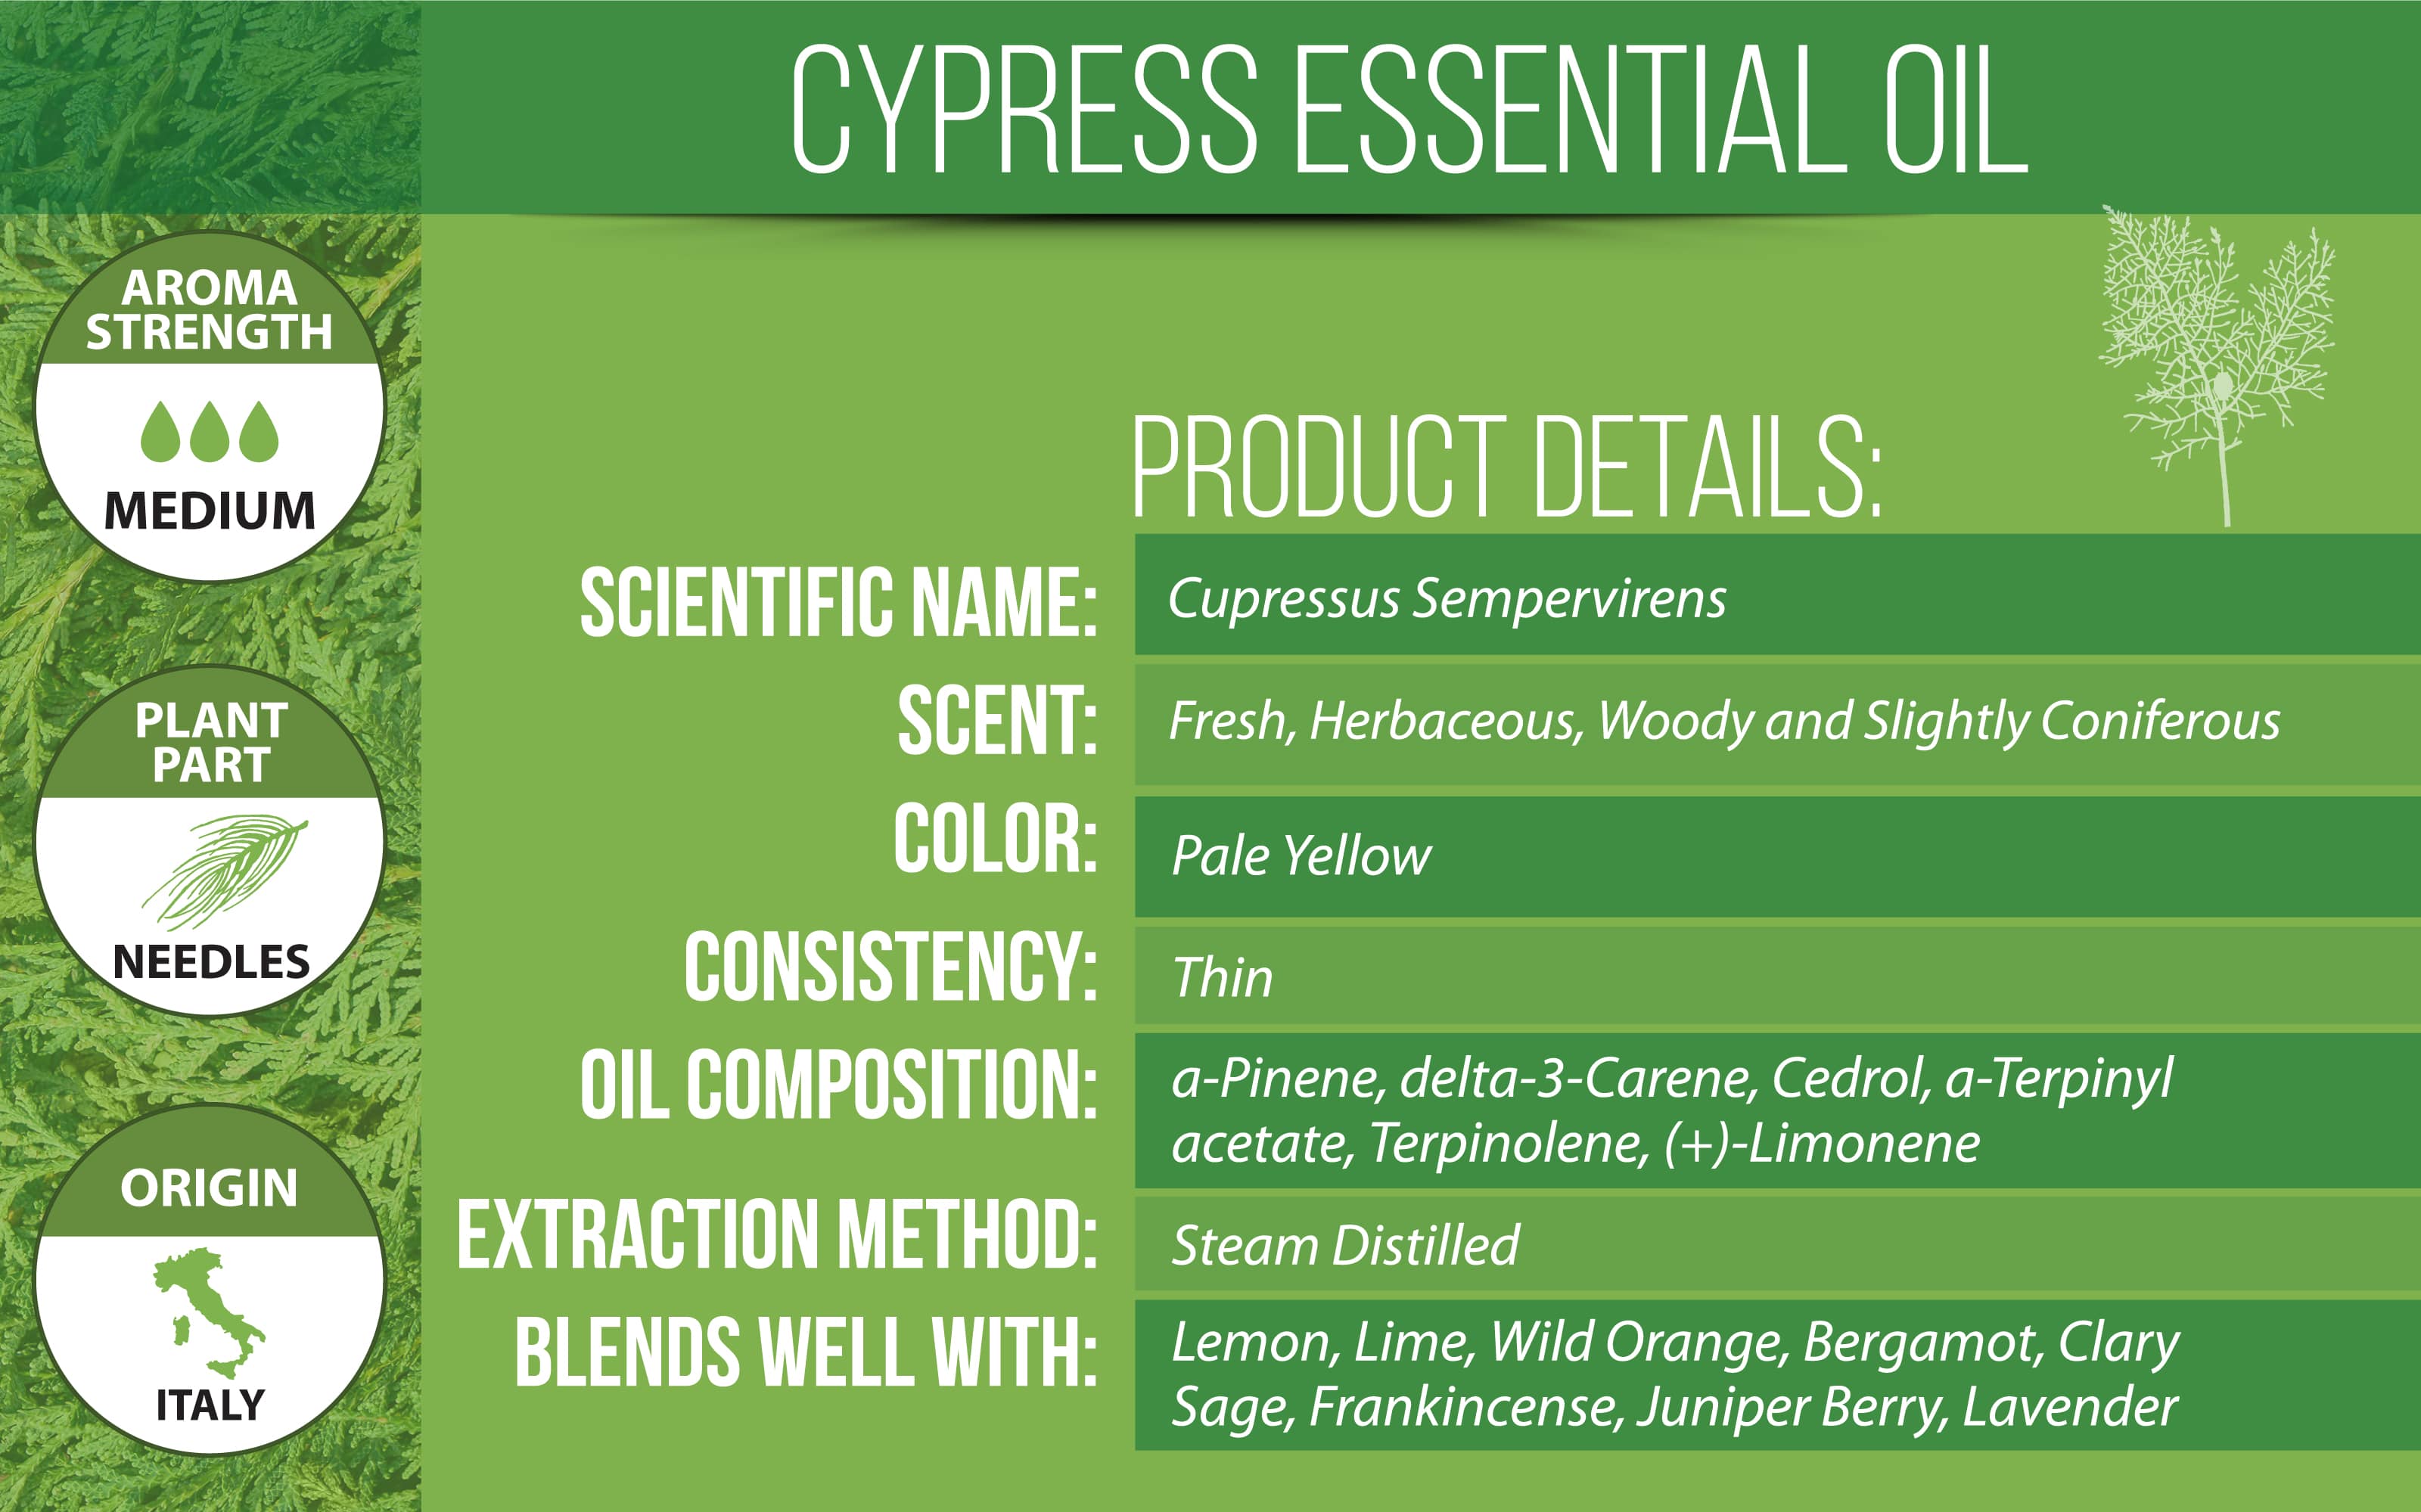 Cypress Essential Oil Product Details